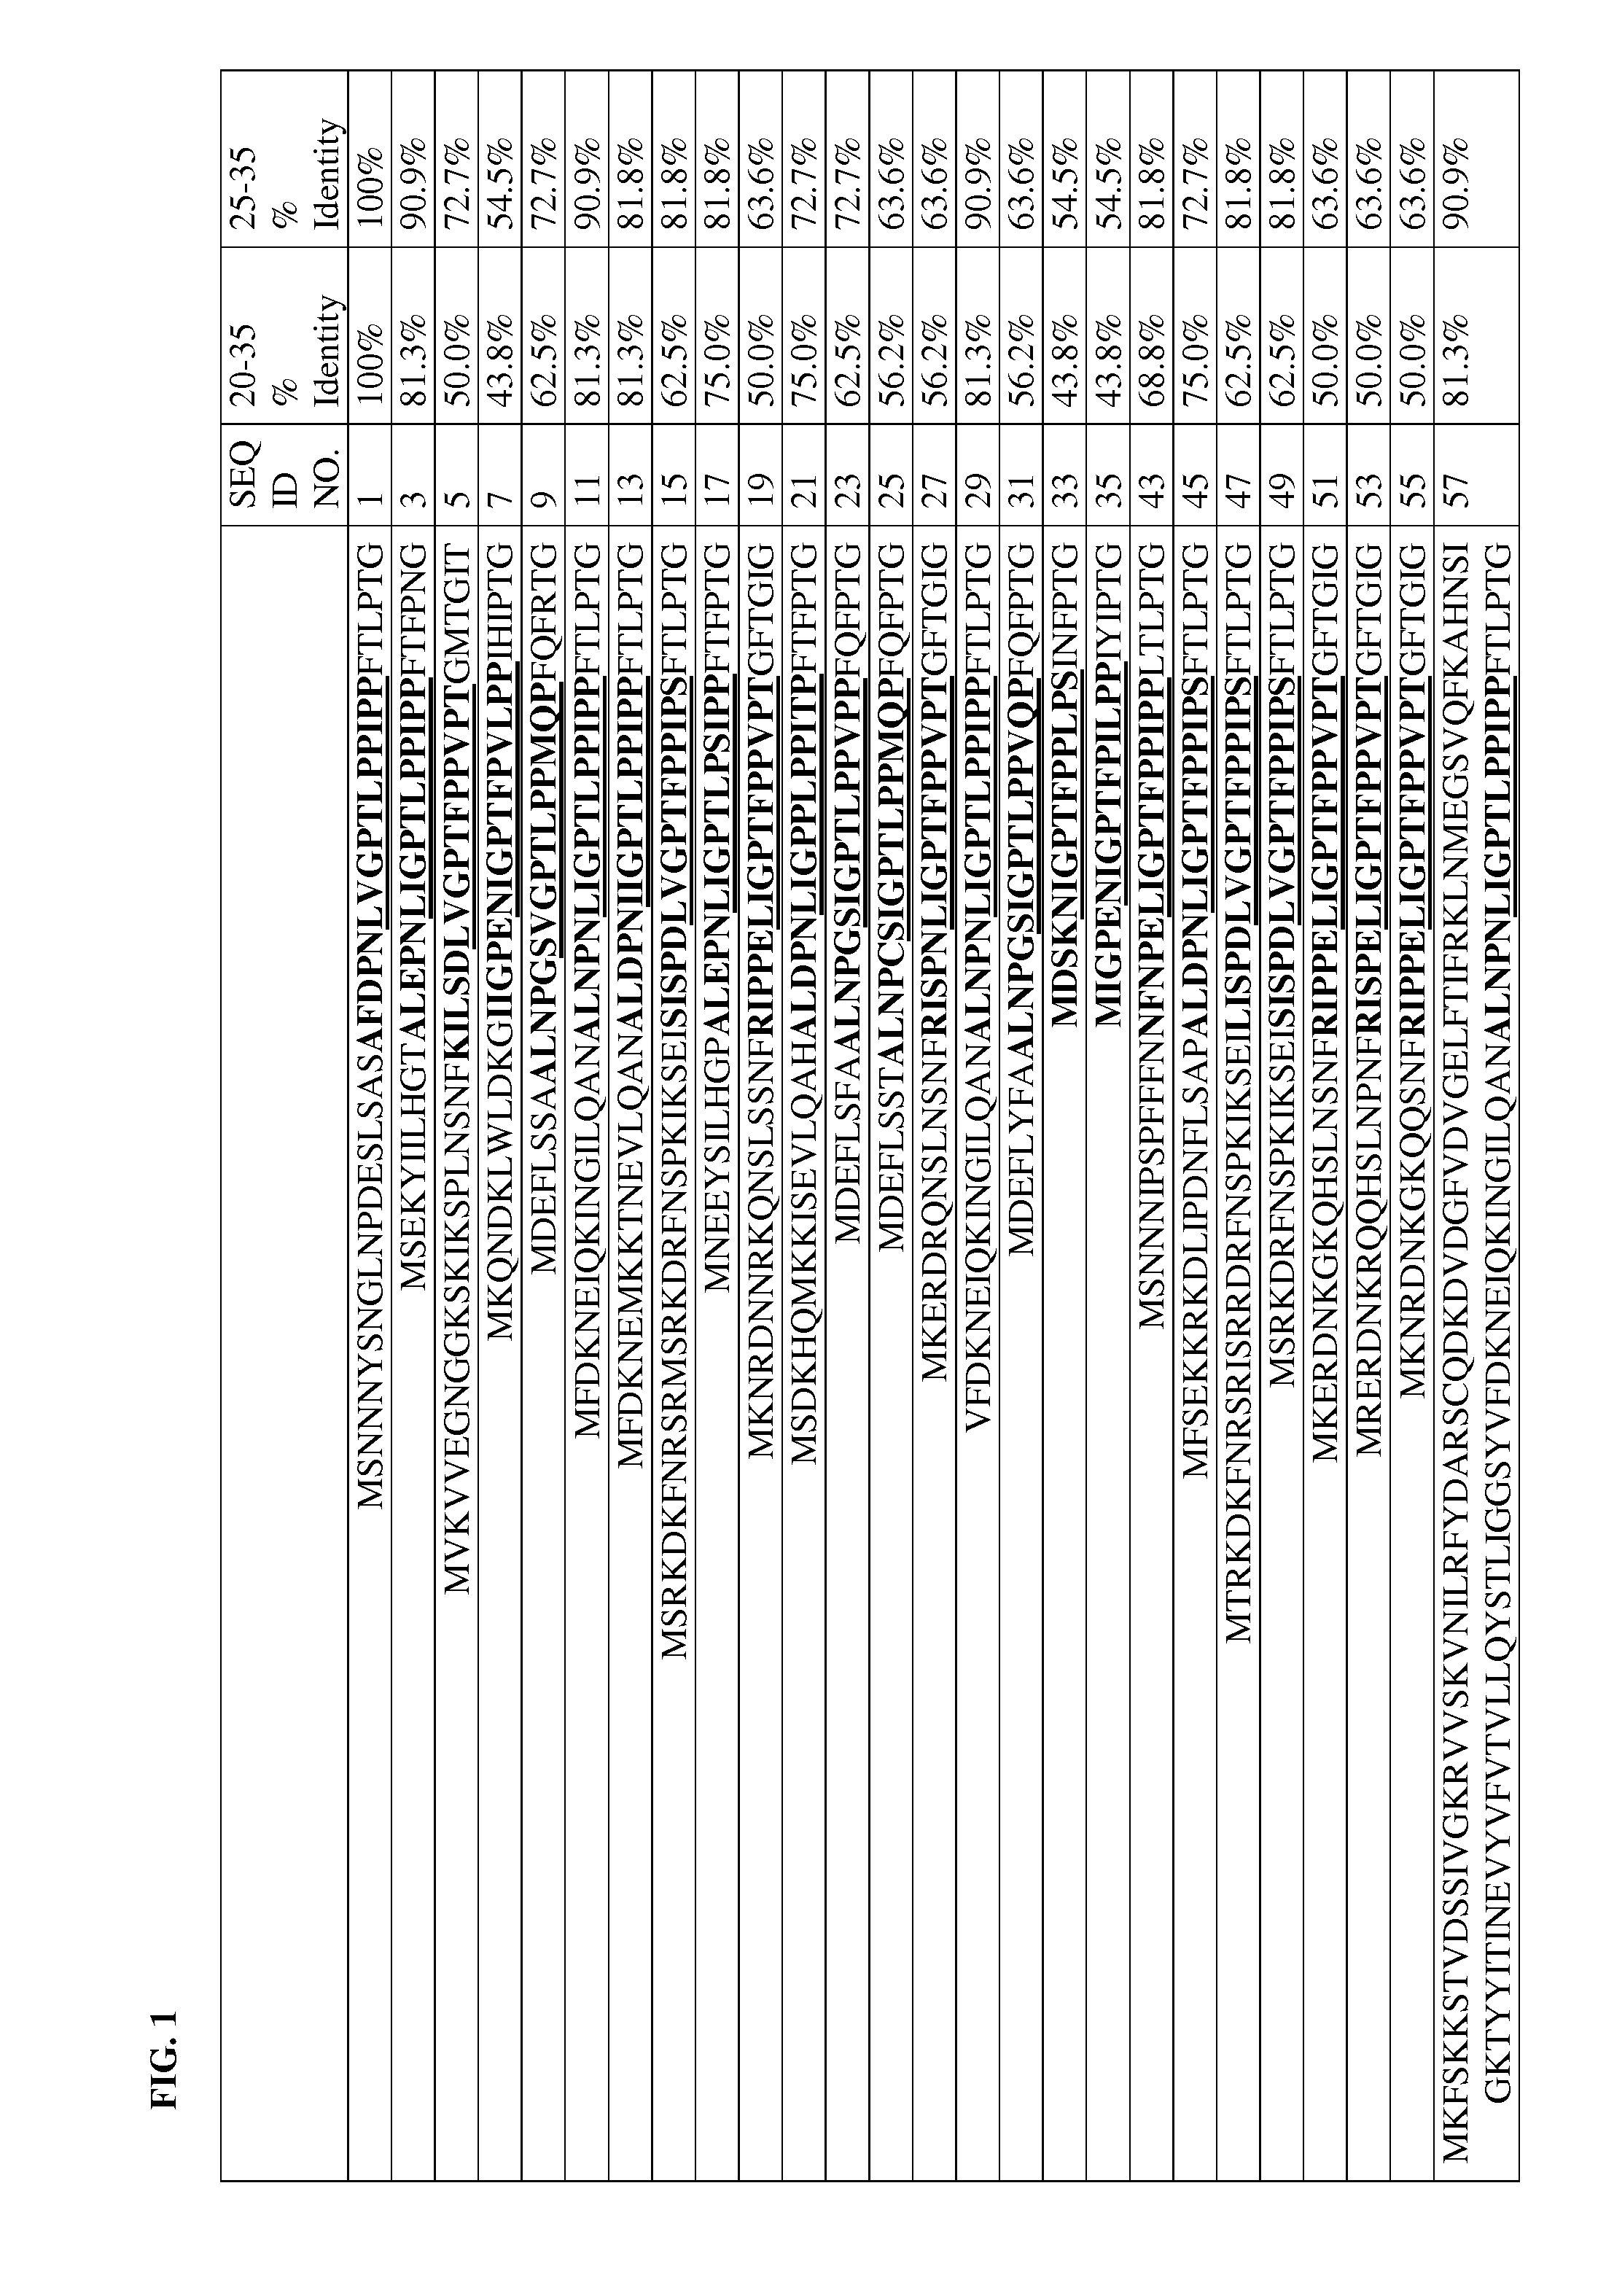 Compositions comprising recombinant bacillus cells and another biological control agent